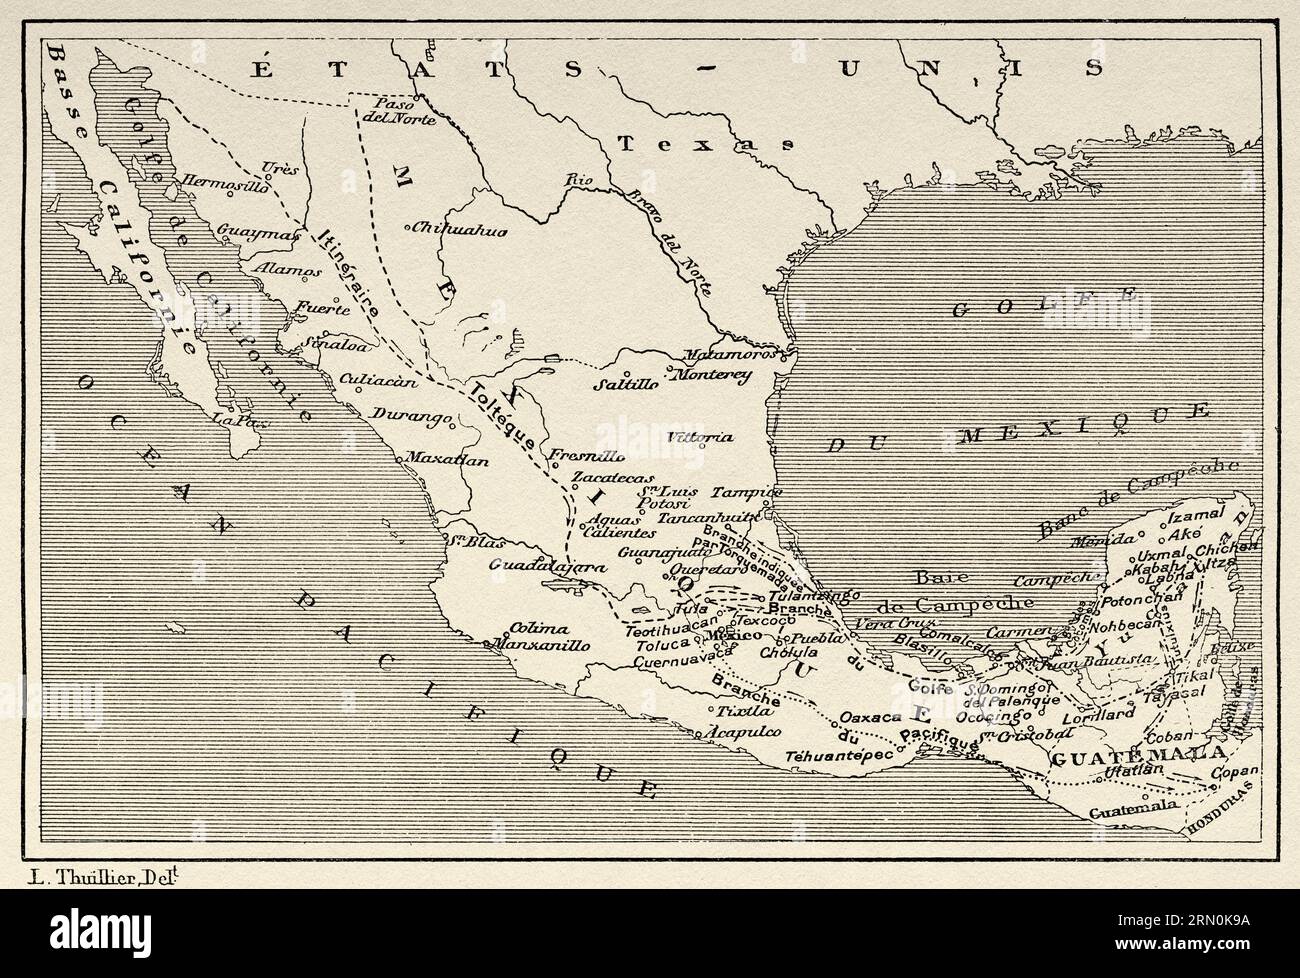 Toltec migration map, Mexico. North America. Trip To The Yucatan And The Land Of The Lacandons By Désiré Charnay 1880. Old 19th century engraving from Le Tour du Monde 1906 Stock Photo